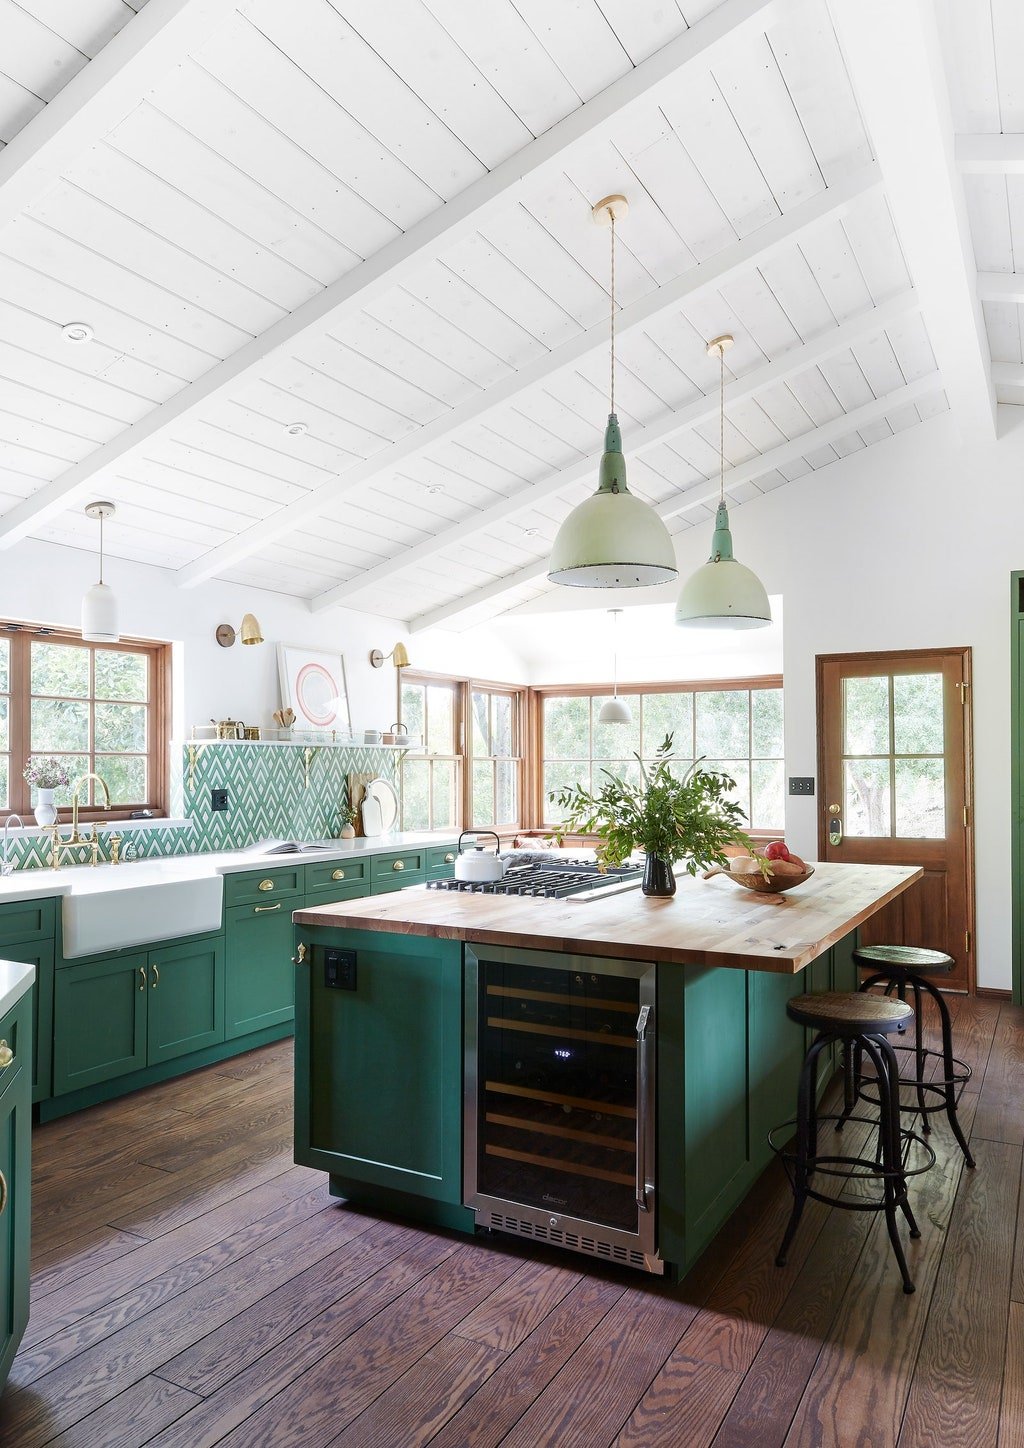 The Top Clever Renovation Stories of 2020